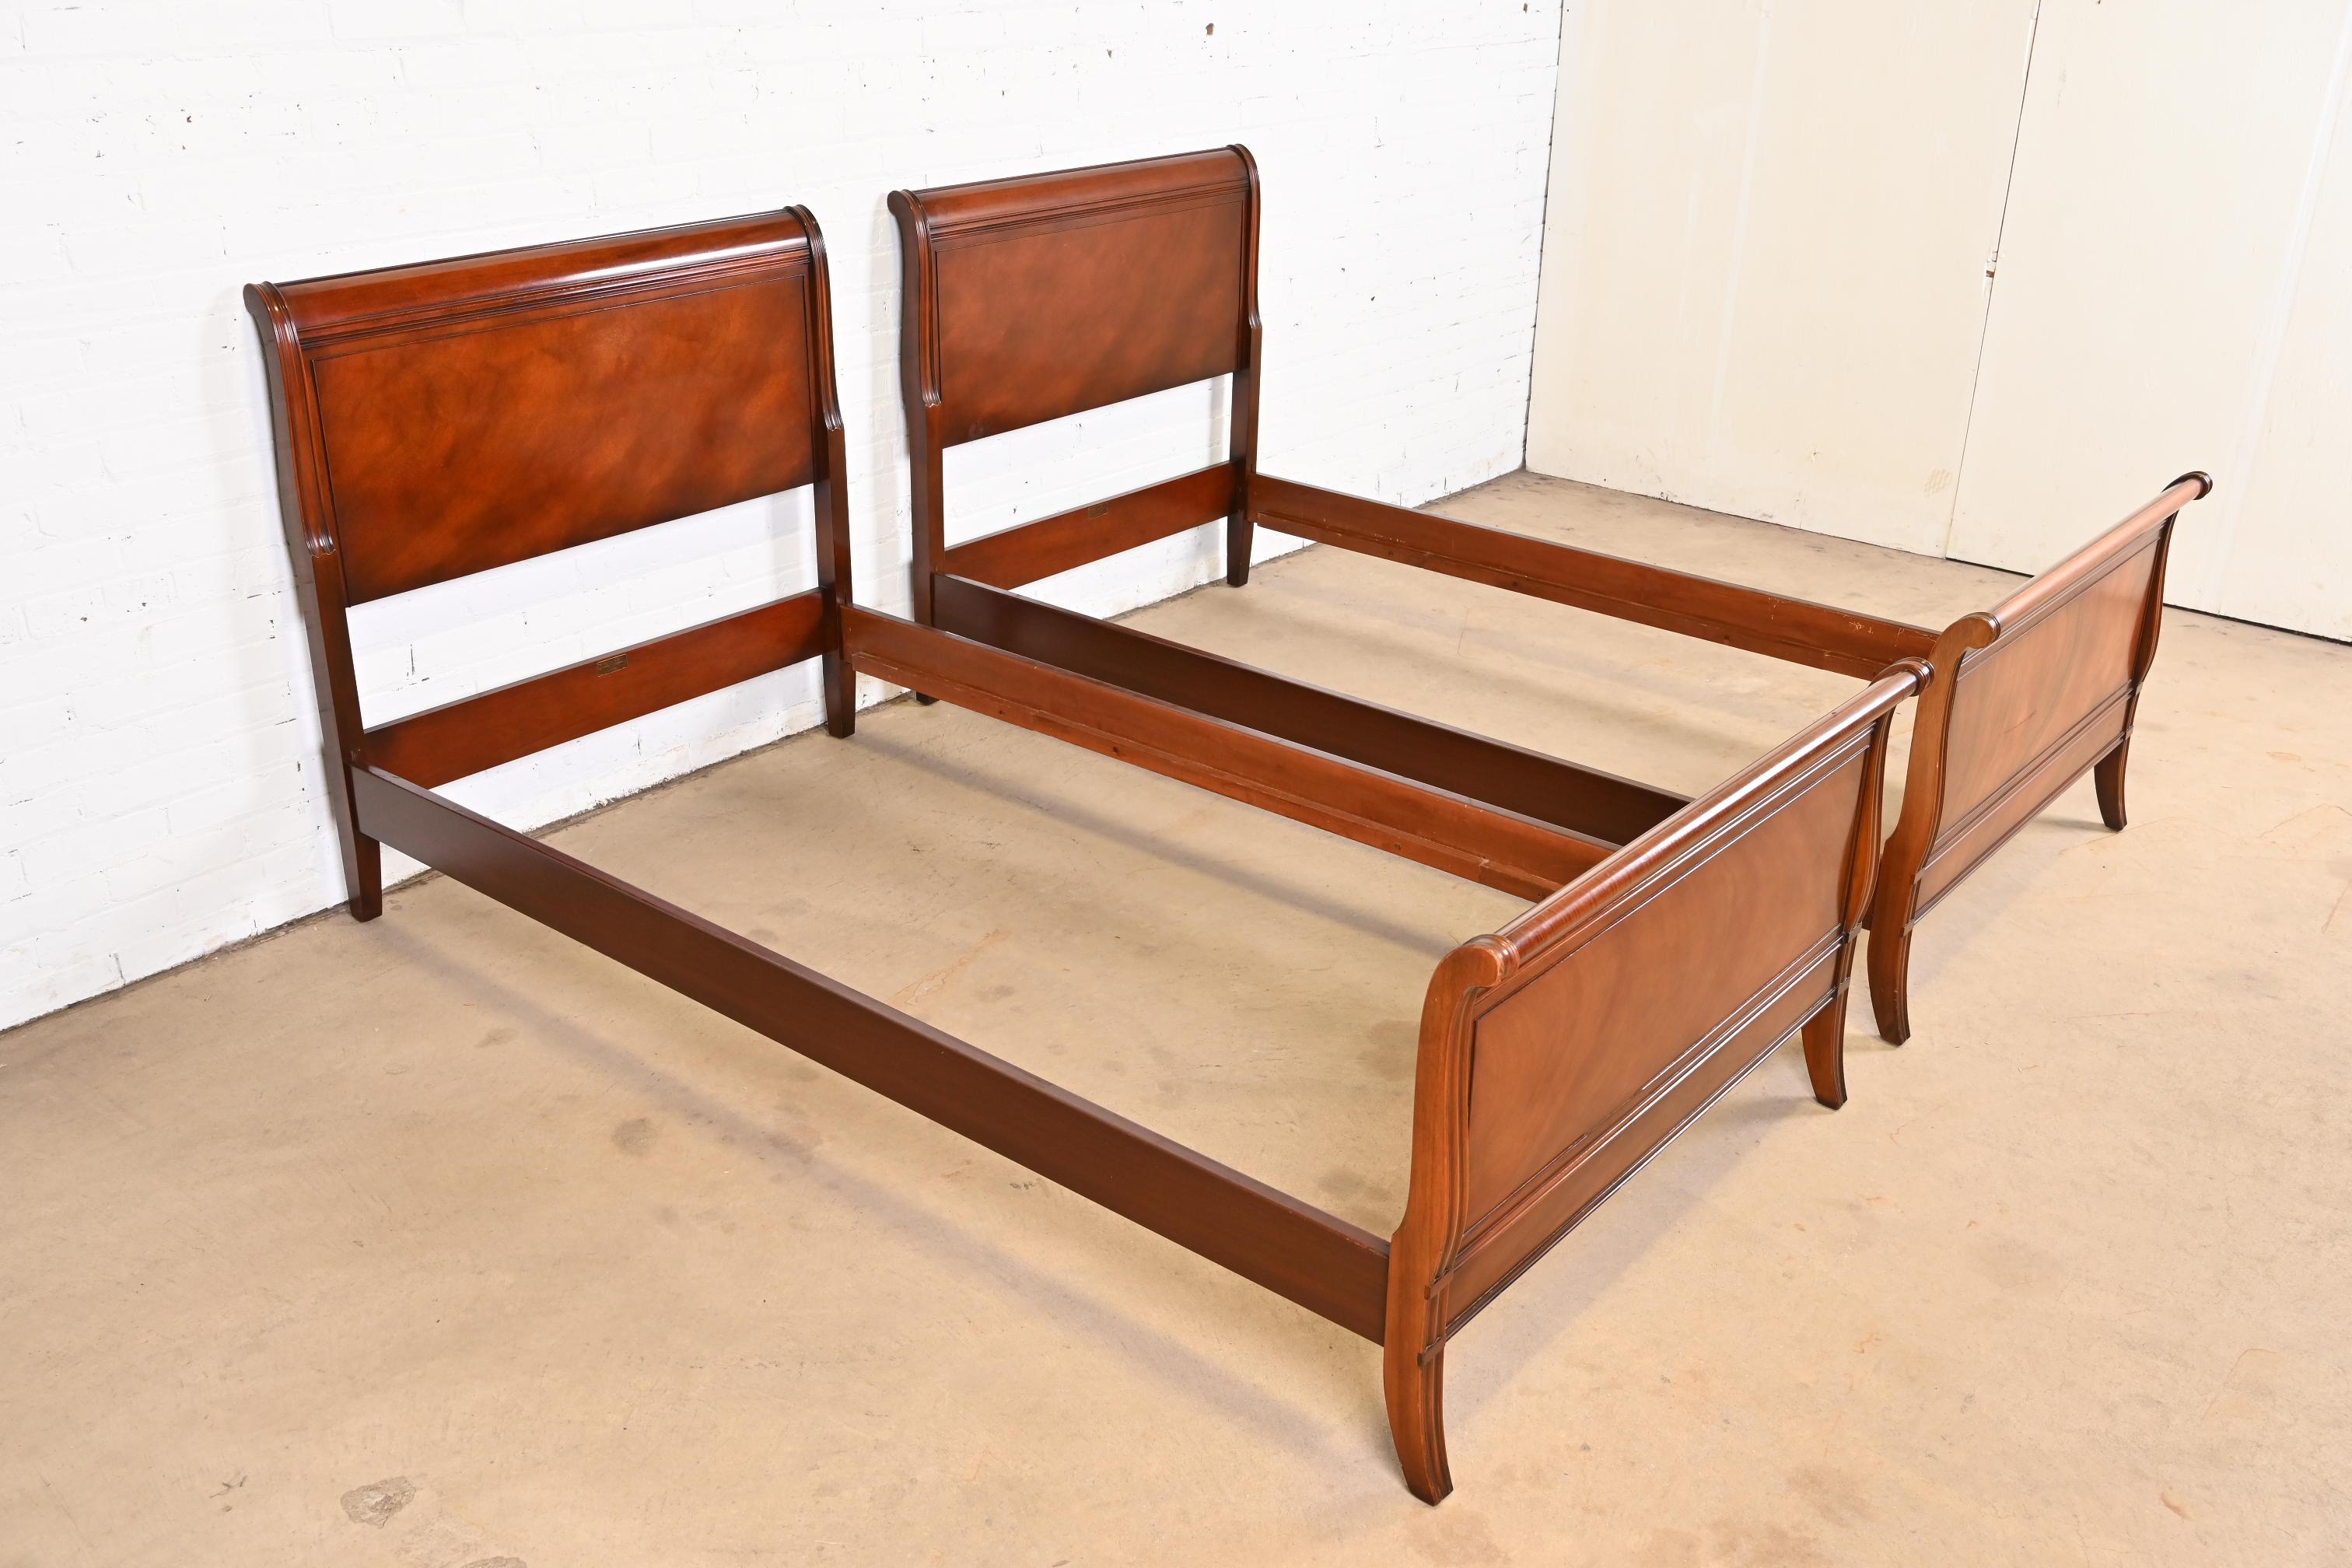 Mid-20th Century Regency Carved Mahogany Twin Size Sleigh Beds by Fallon & Hellen, circa 1930s